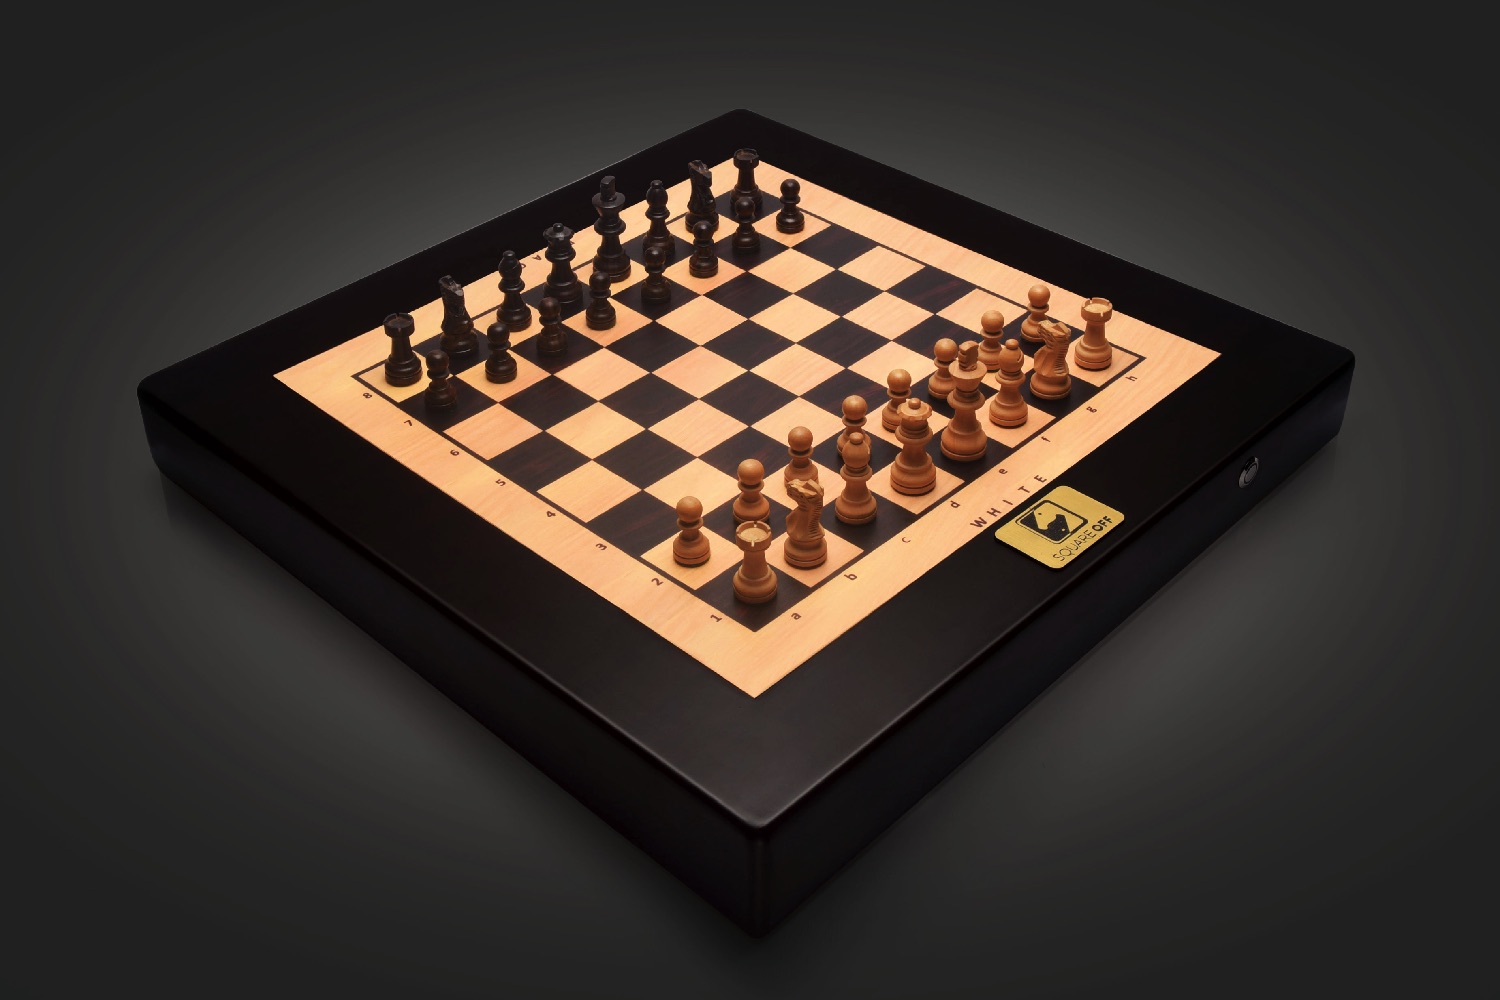 square off chess board reviving traditional game with a tech twist